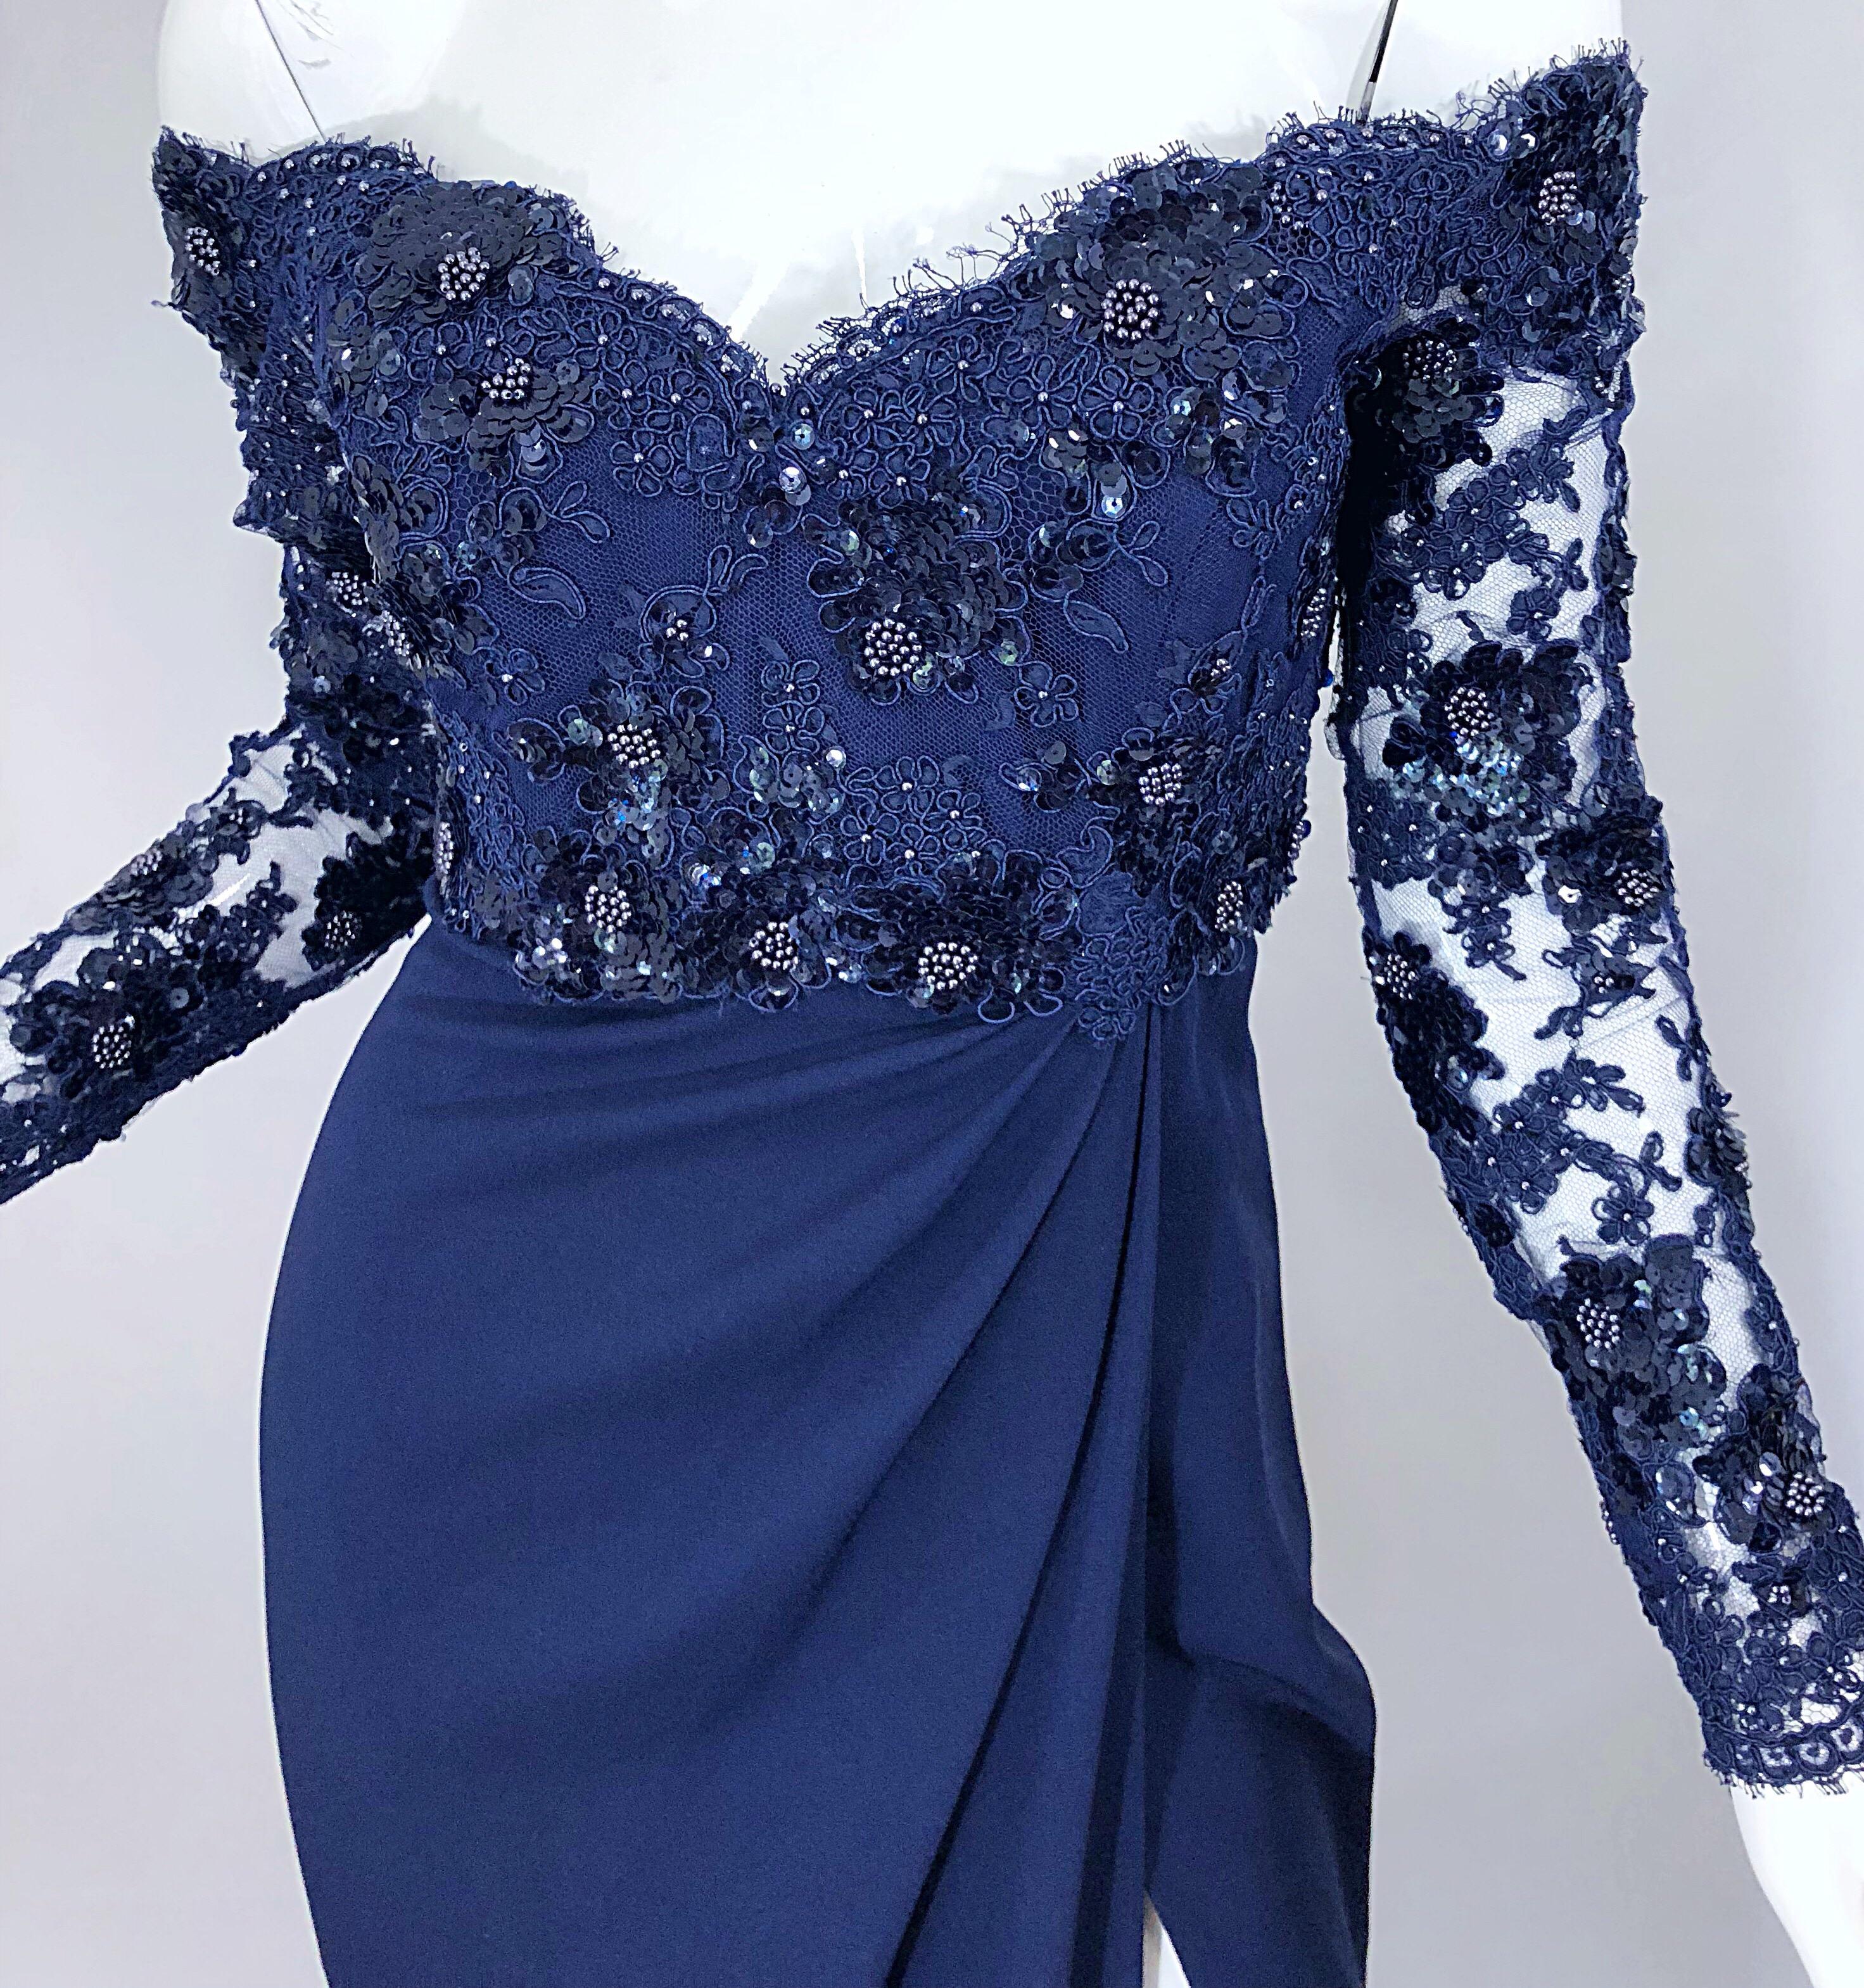 Beautiful vintage CHRISTIAN DIOR navy blue lace, sequin and crepe evening dress! This gown is both flattering and versatile in that it can truly be worn on or off the shoulders. Couture quality one would expect from the French power Fashion House.